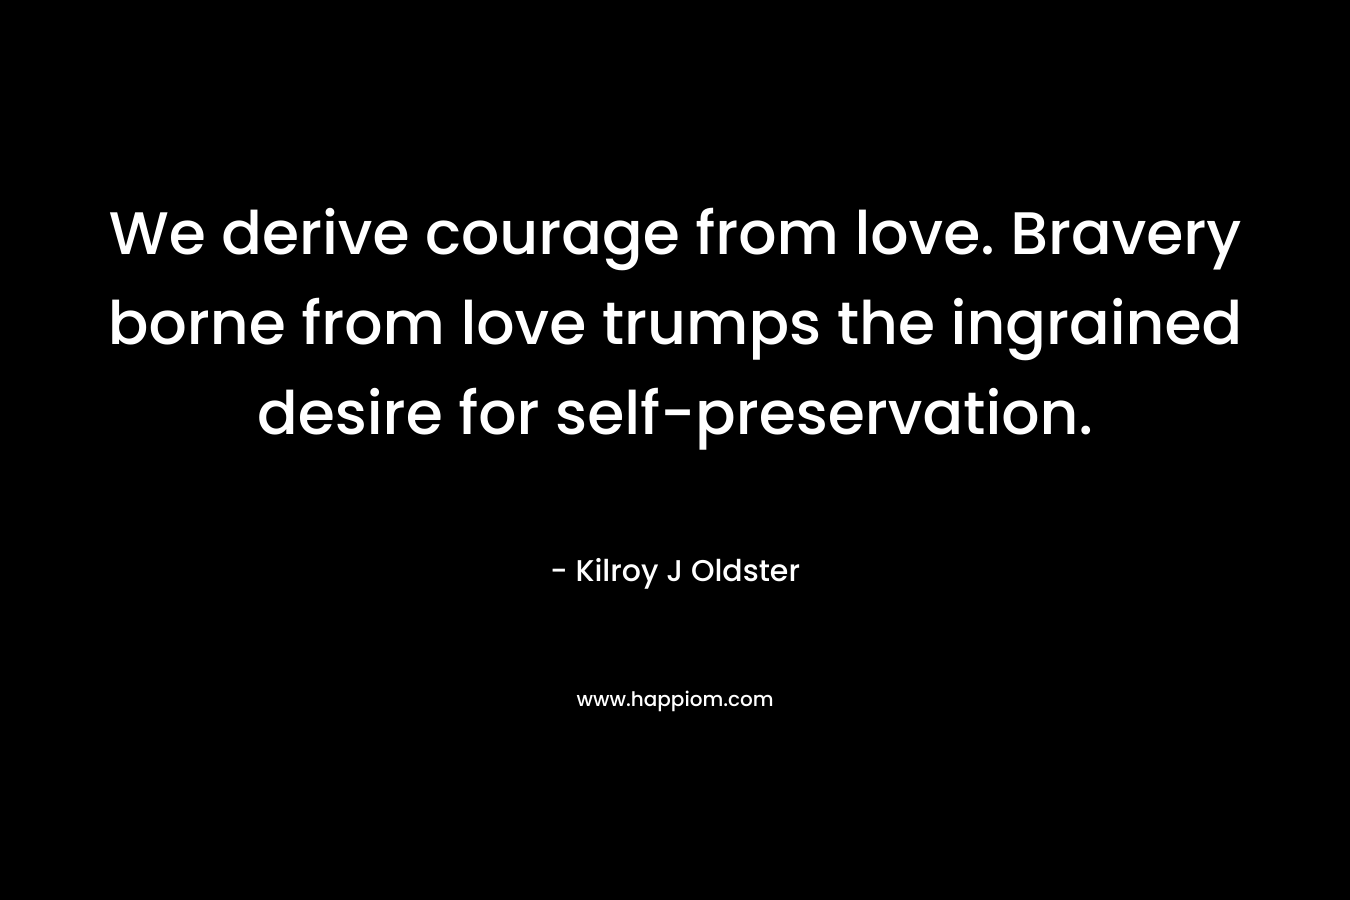 We derive courage from love. Bravery borne from love trumps the ingrained desire for self-preservation. – Kilroy J Oldster